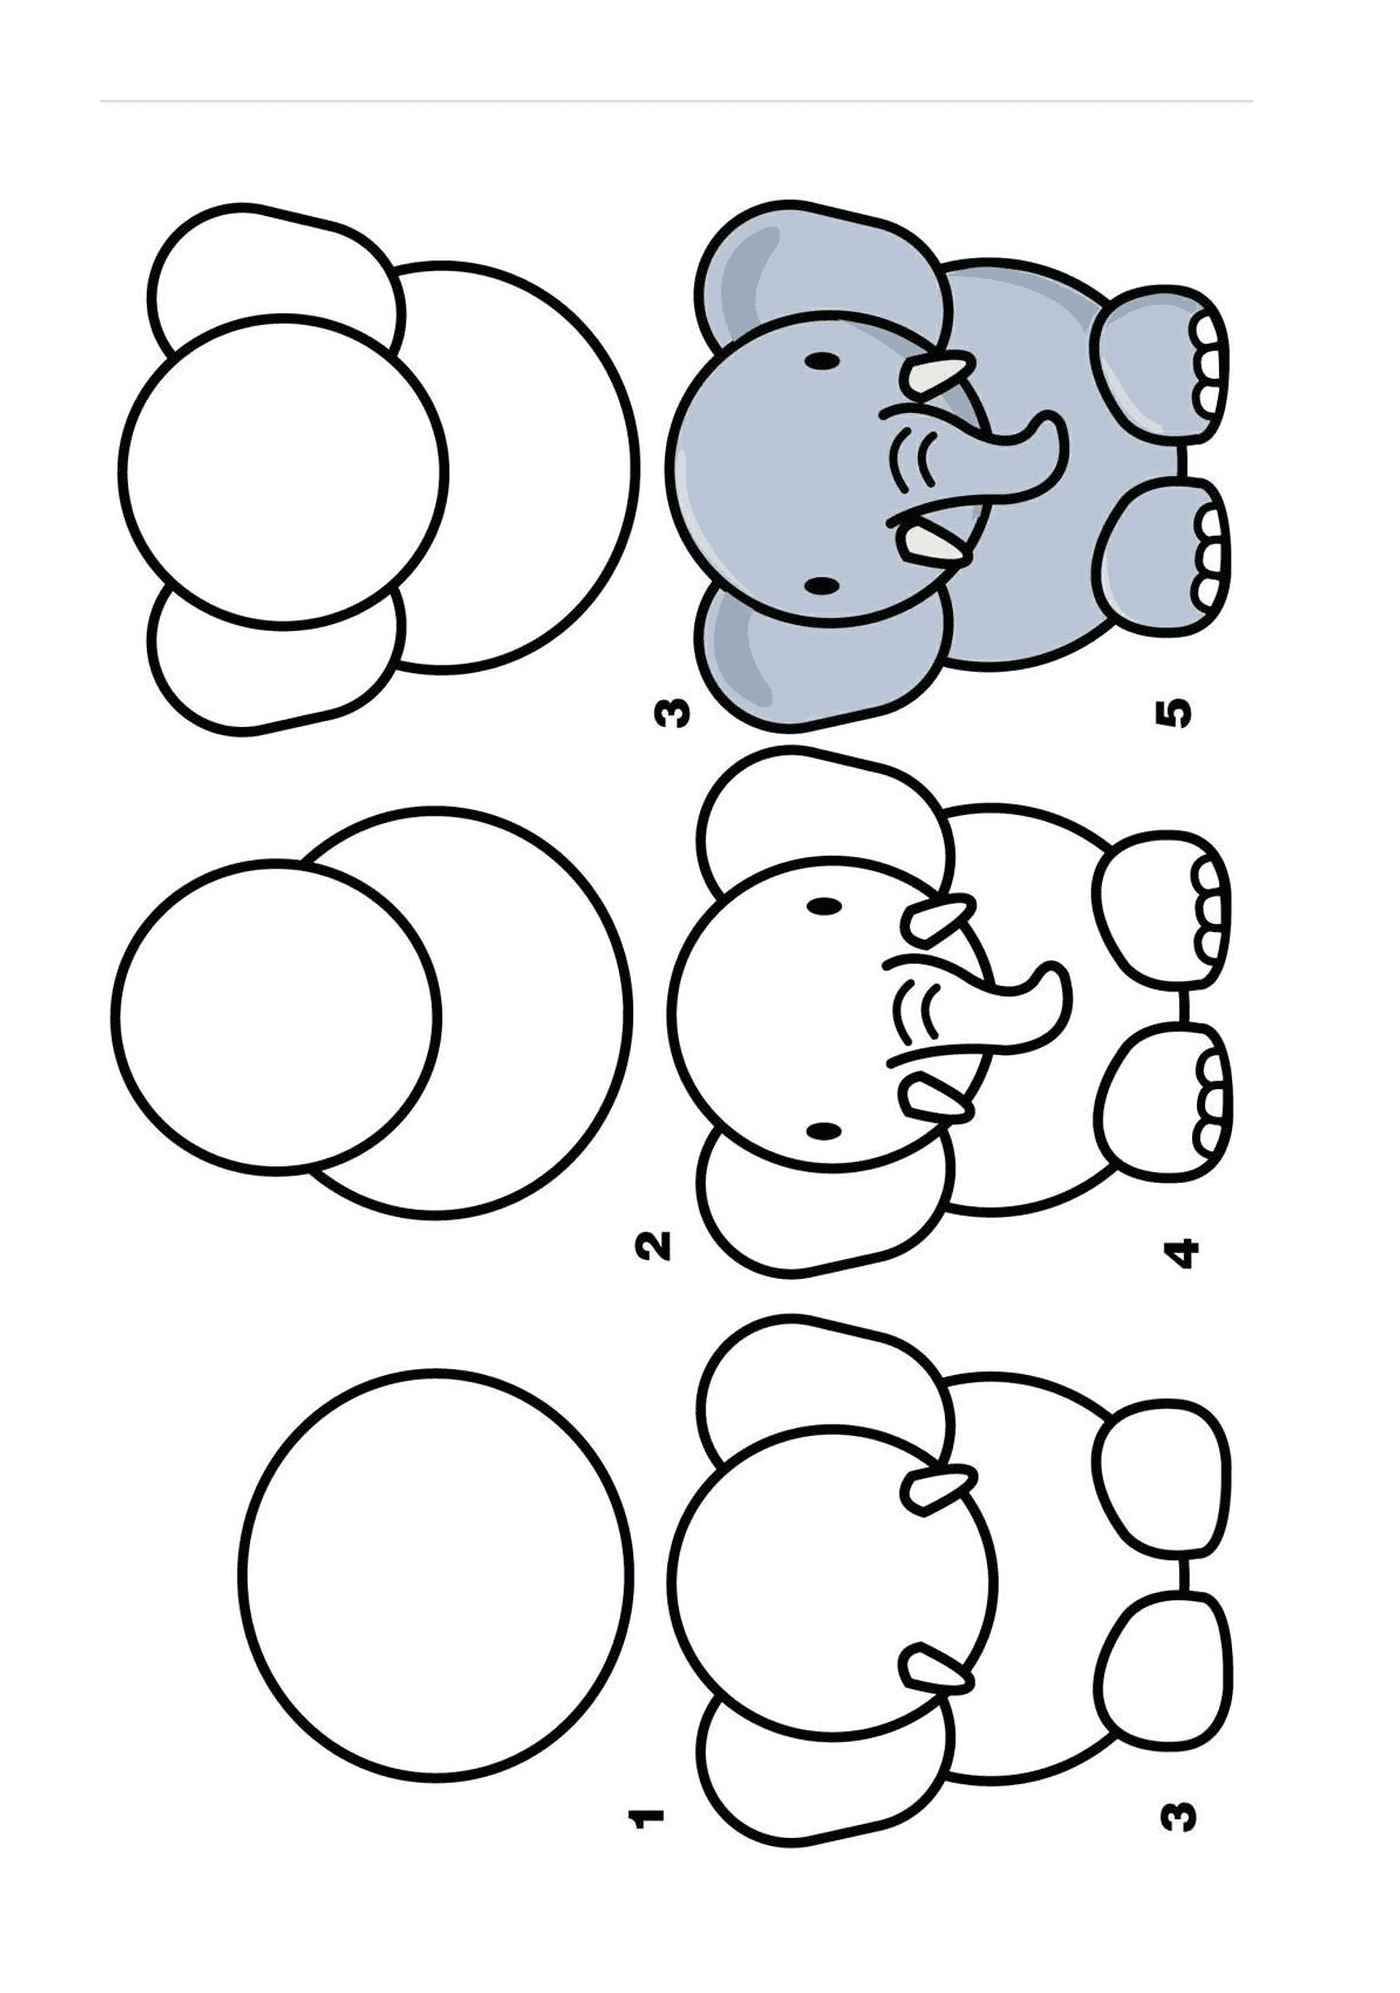  Step by step instructions on how to draw an elephant 